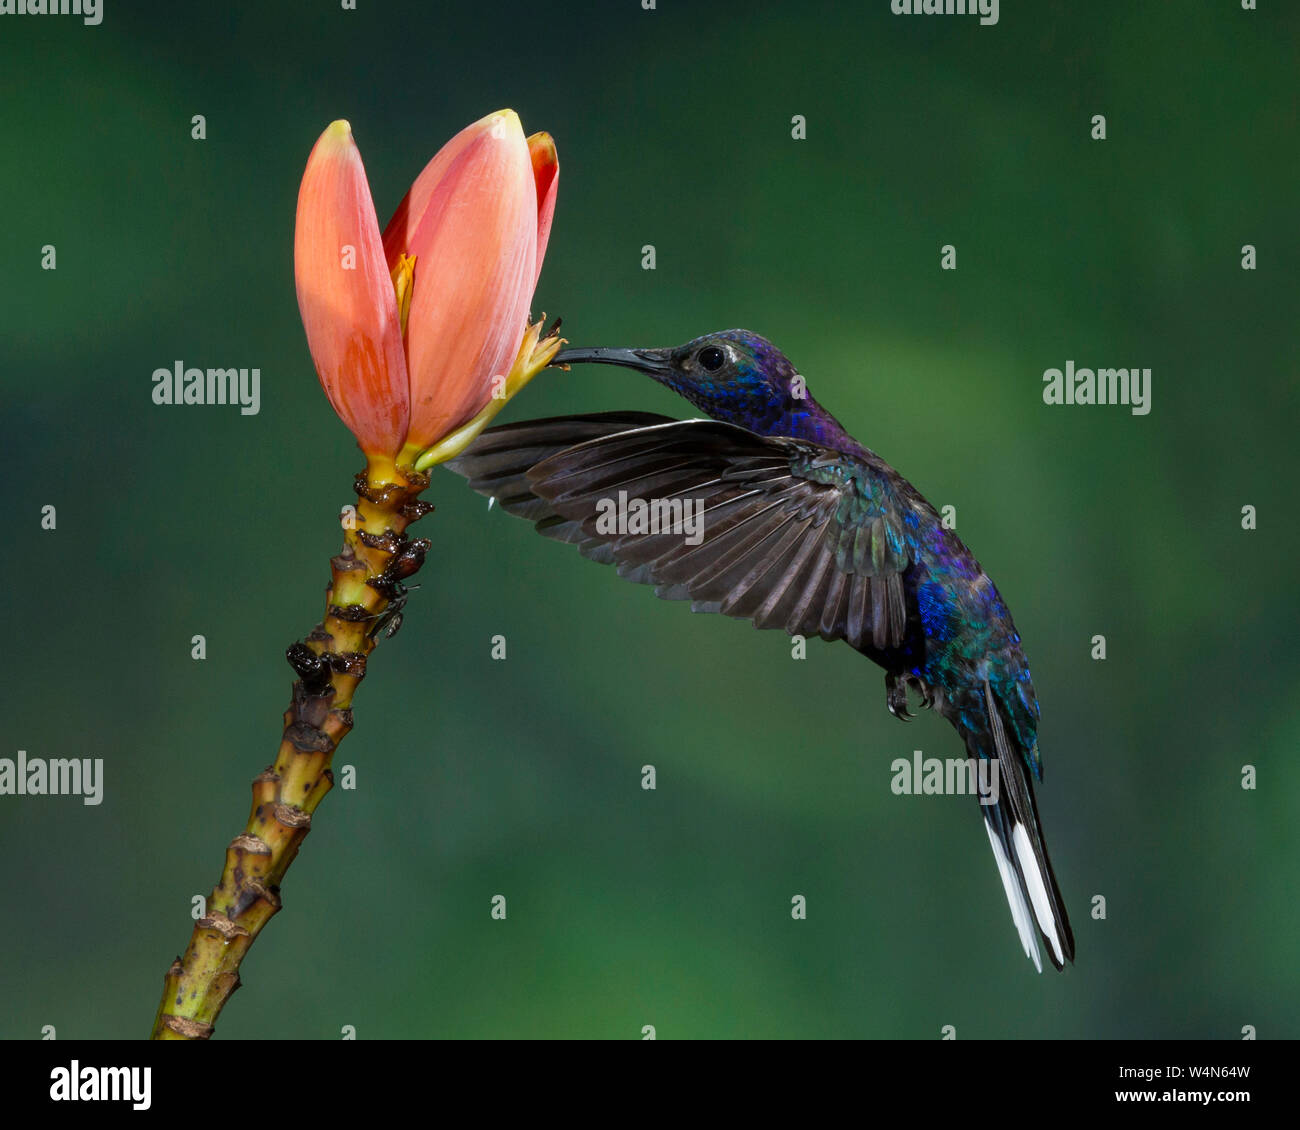 Animals, Bird, Hummingbird, A male Violet Sabrewing Hummingbird, Campylopterus hemileucurus, feeds on the nectar of the flower of a tropical banana plant in Costa Rica. Stock Photo